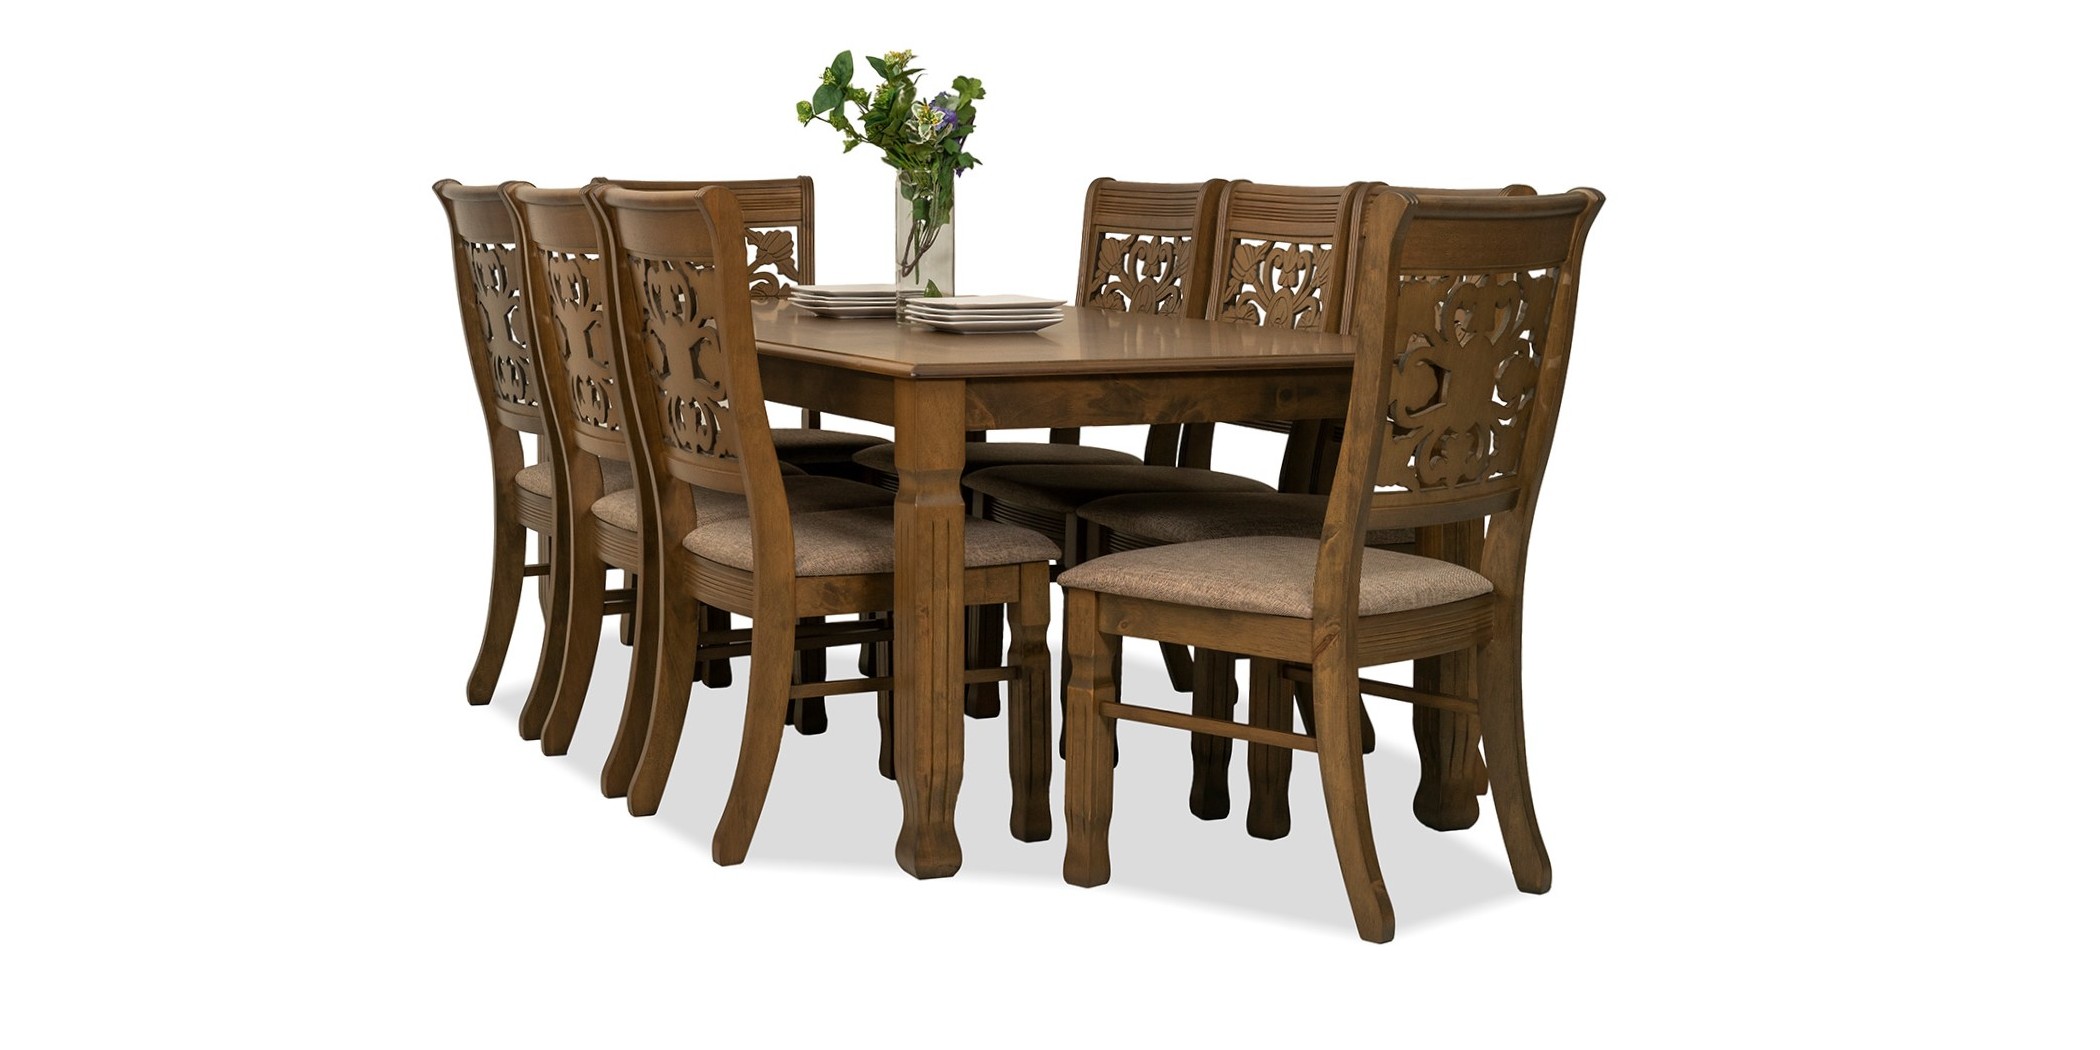 Lexington Table and 8 Chairs Antique Nyatuh